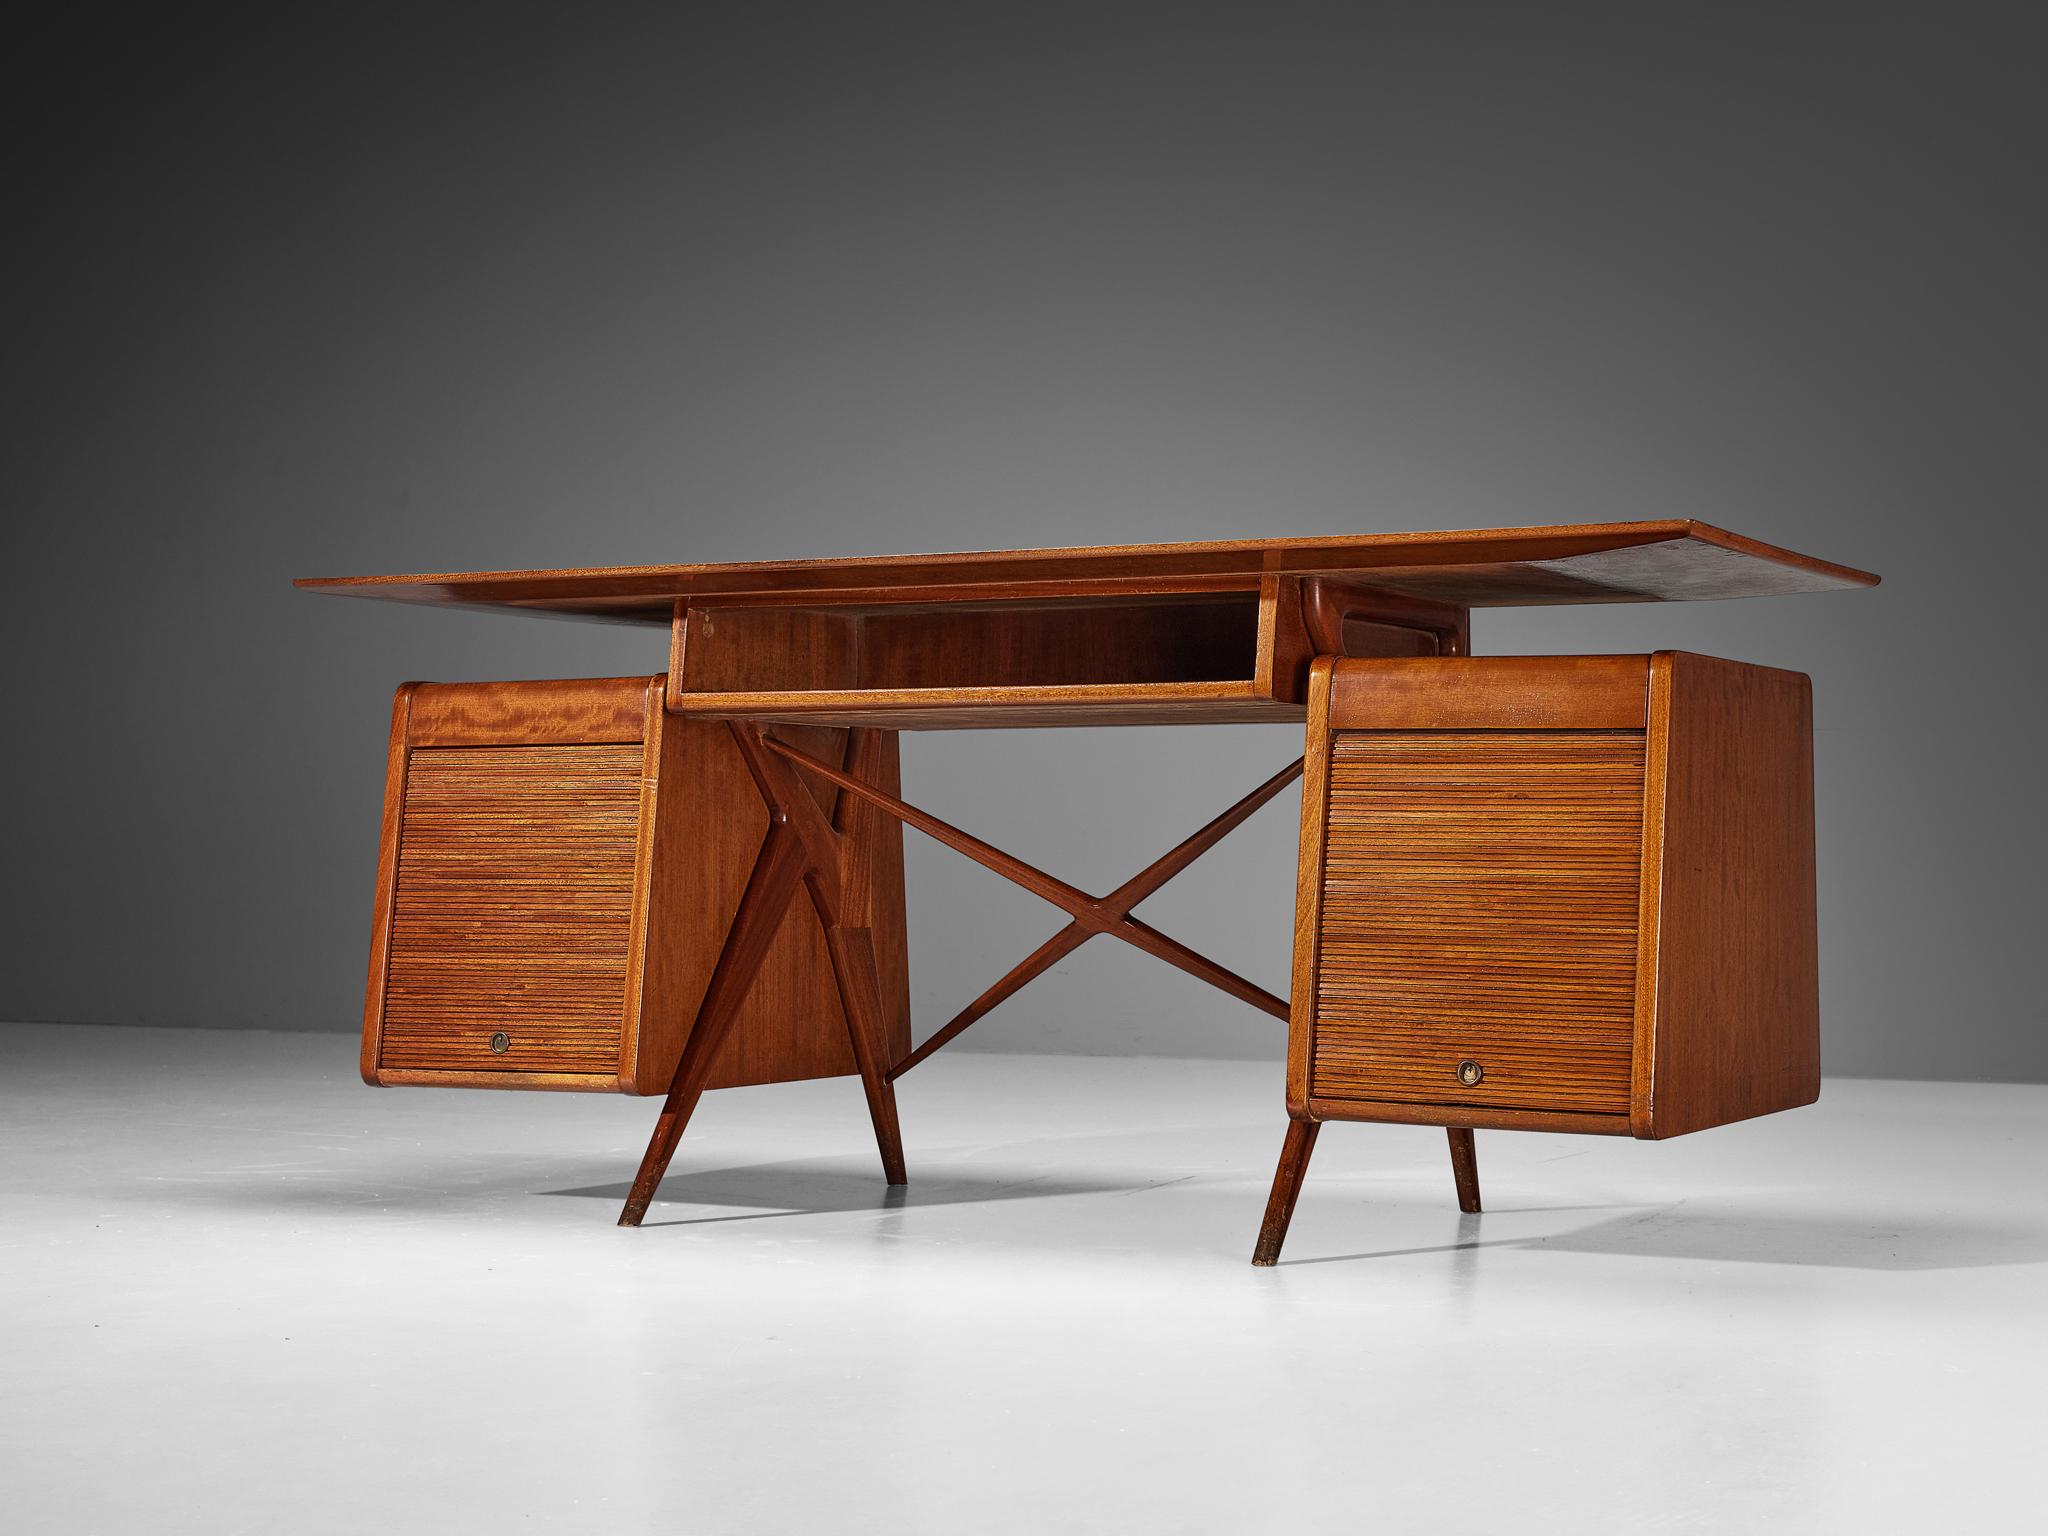 Silvio Cavatorta desk, mahogany, brass, Italy, design 1948-1949

Beautifully shaped desk in mahogany designed by Silvio Cavatorta in the late 1940s. The desk consists of a sleek top, cross shaped stretchers at the back and sides, and two cabinets